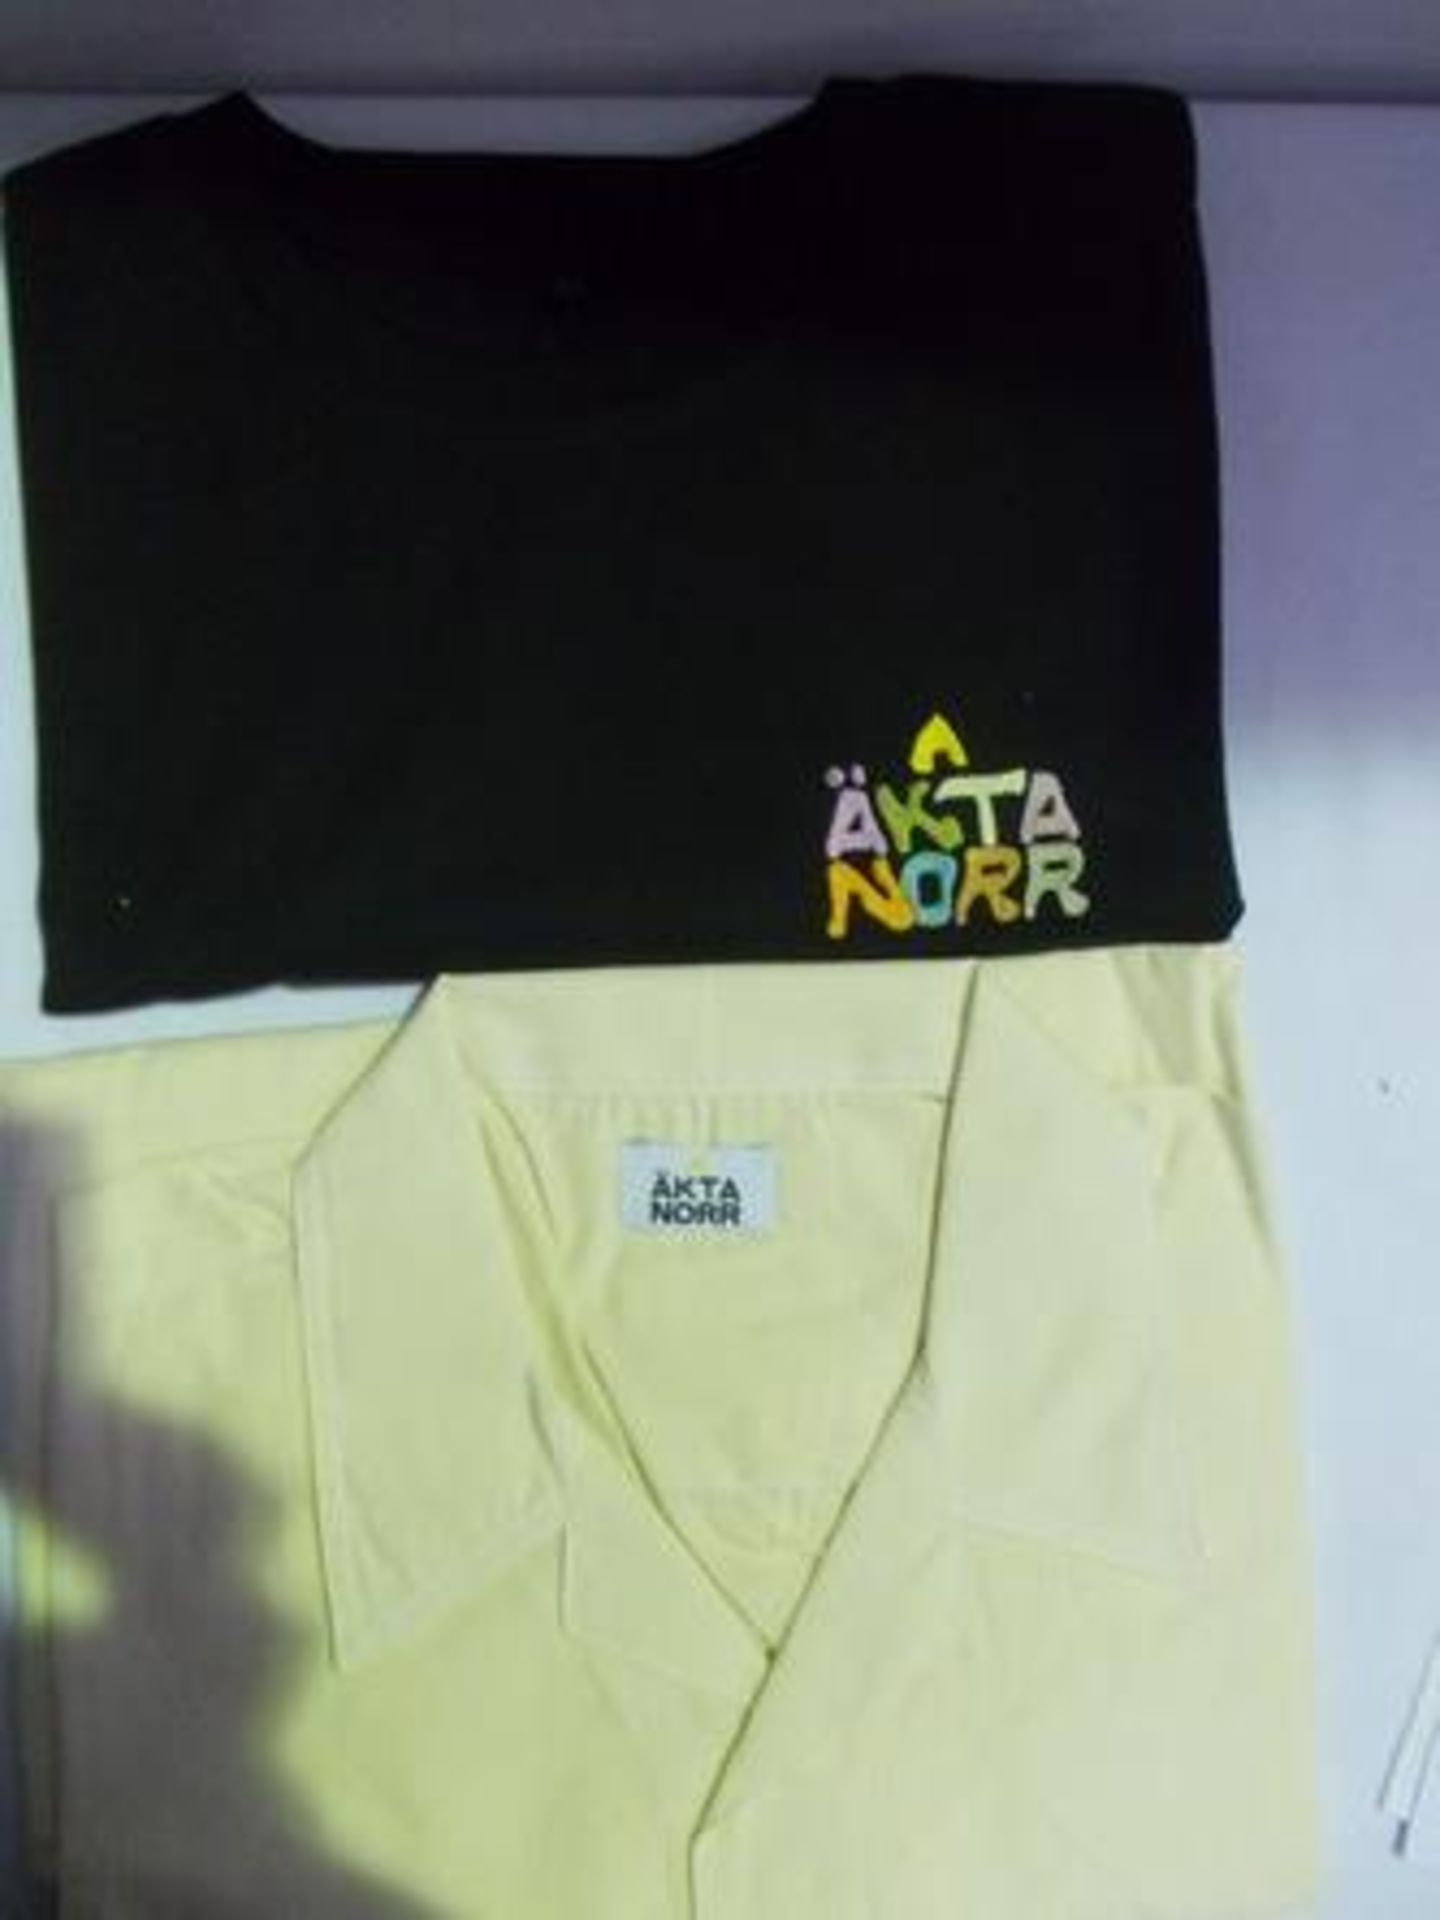 2 x items of Akta Norr men's clothing comprising 1 x black logo t-shirt, size L and 1 x oversized